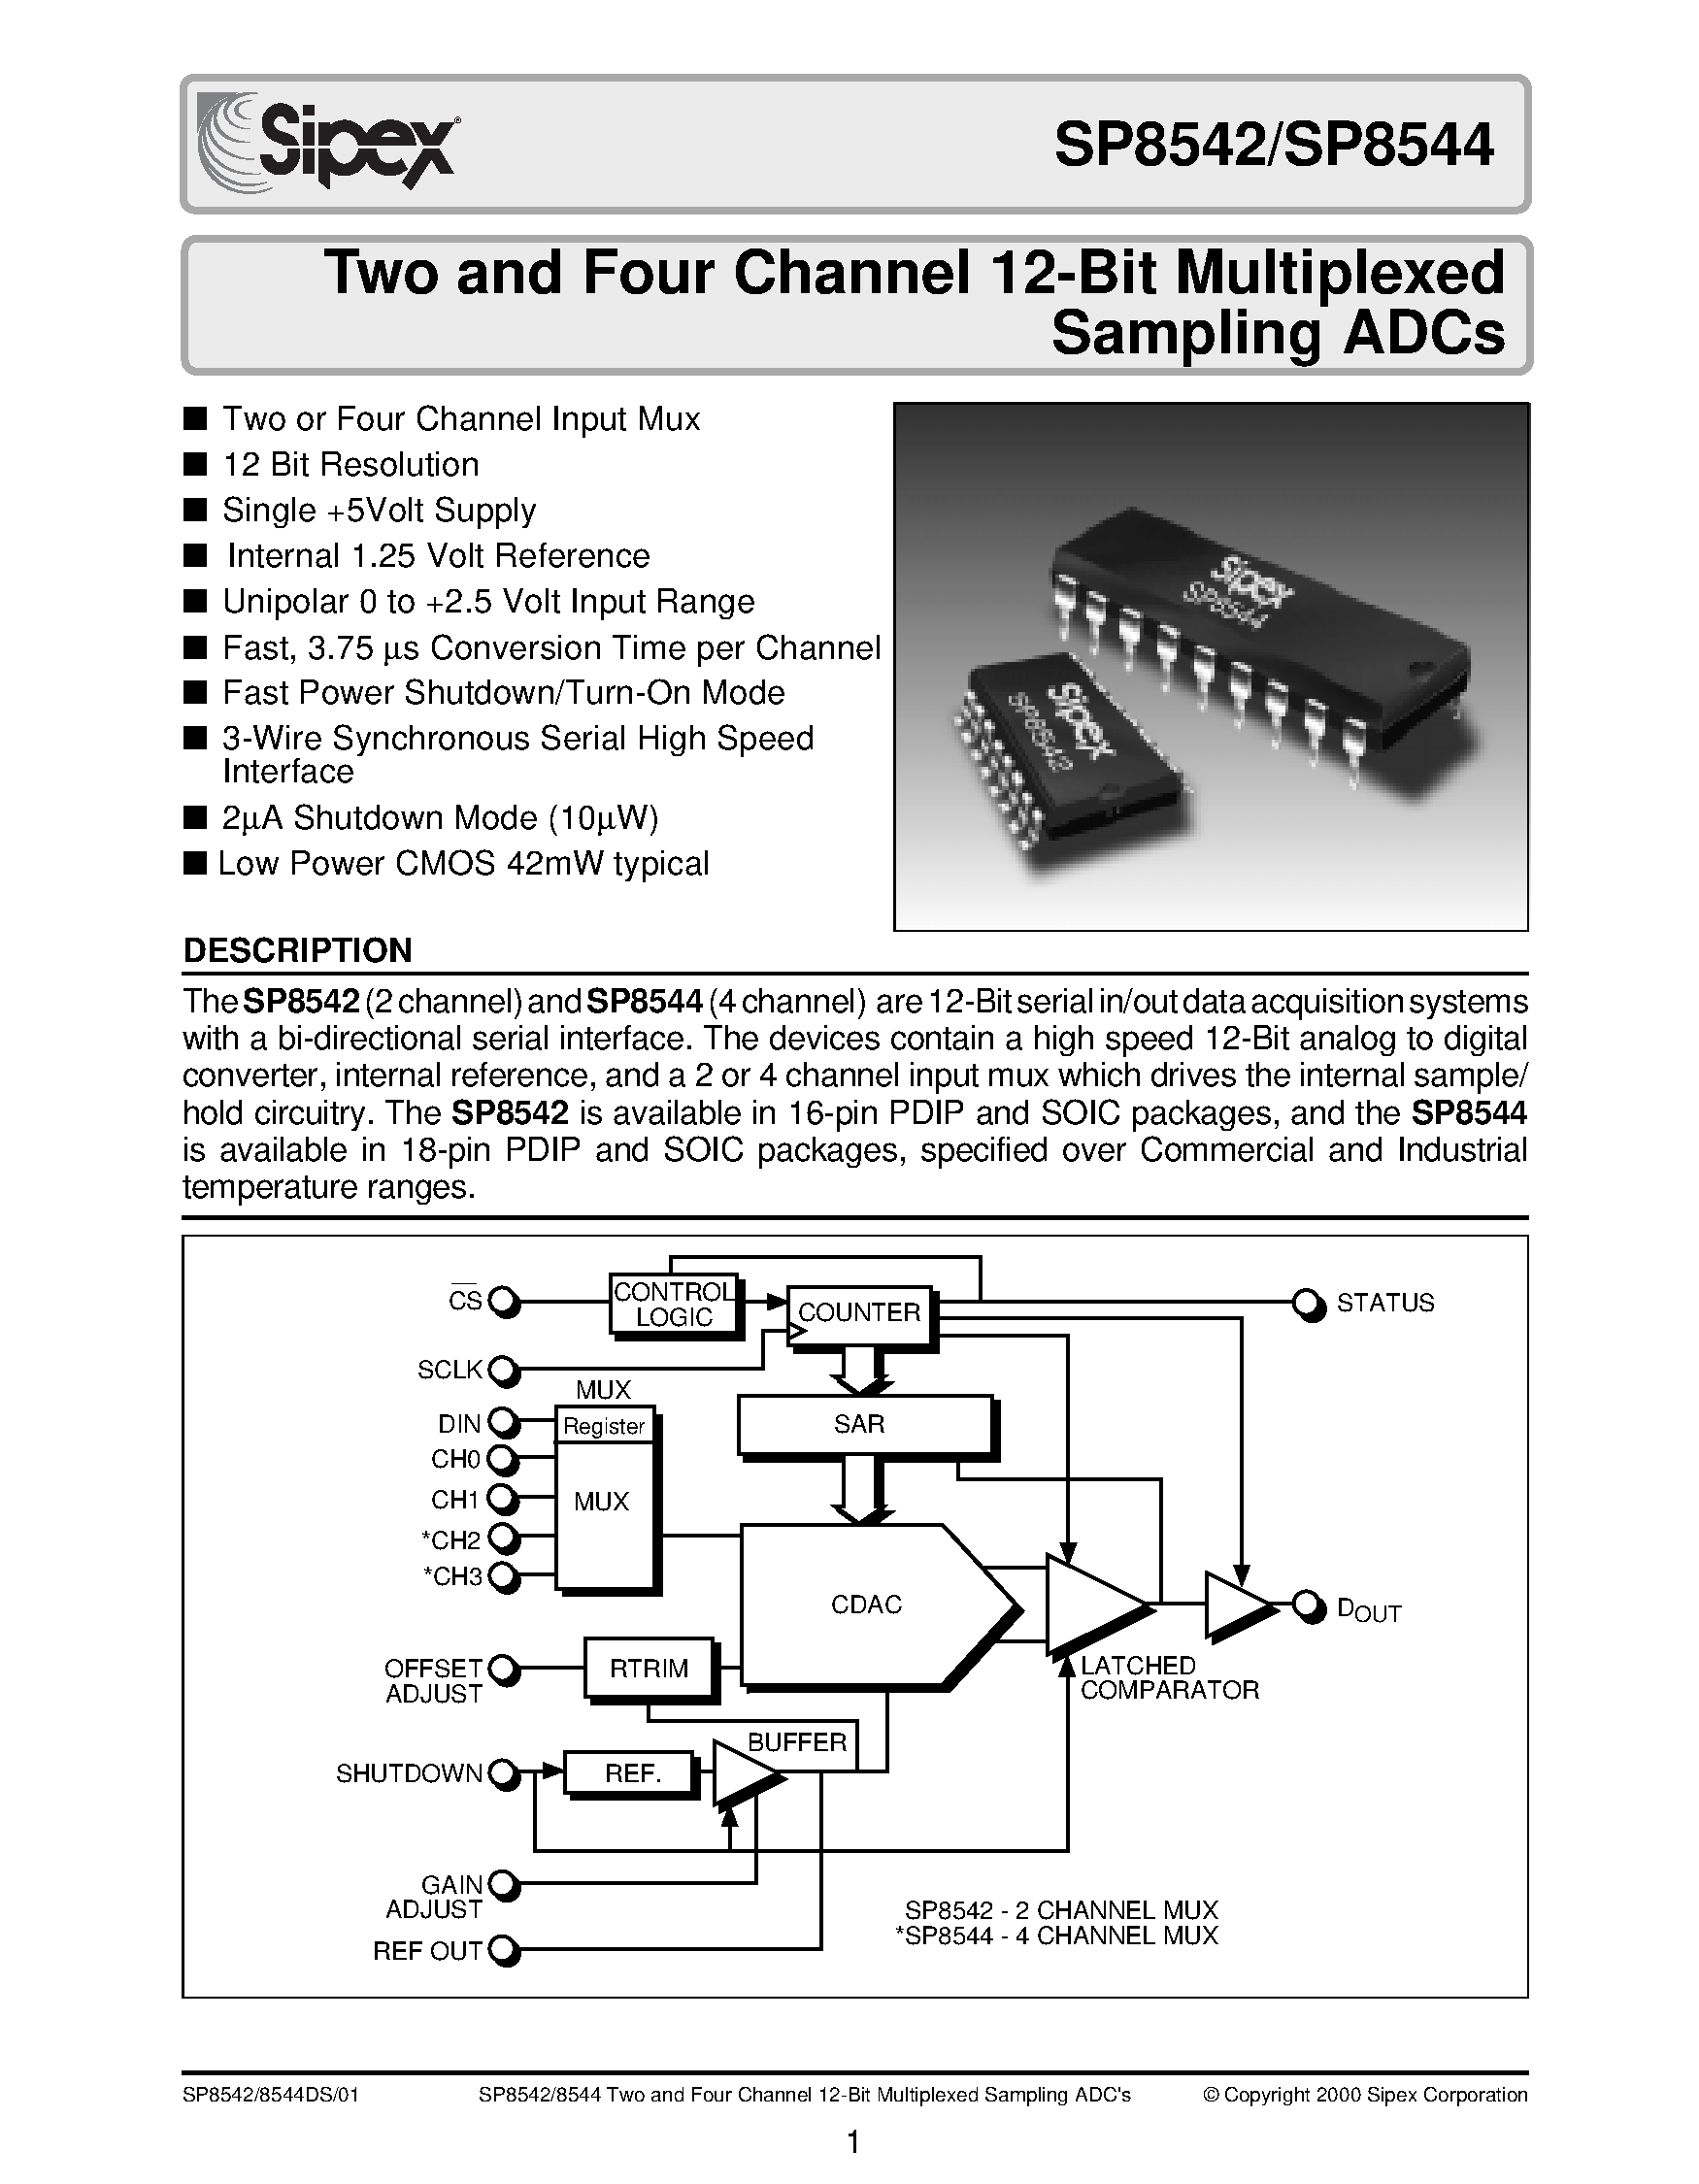 Datasheet SP8542BS - Two and Four Channel 12-Bit Multiplexed Sampling ADCs page 1